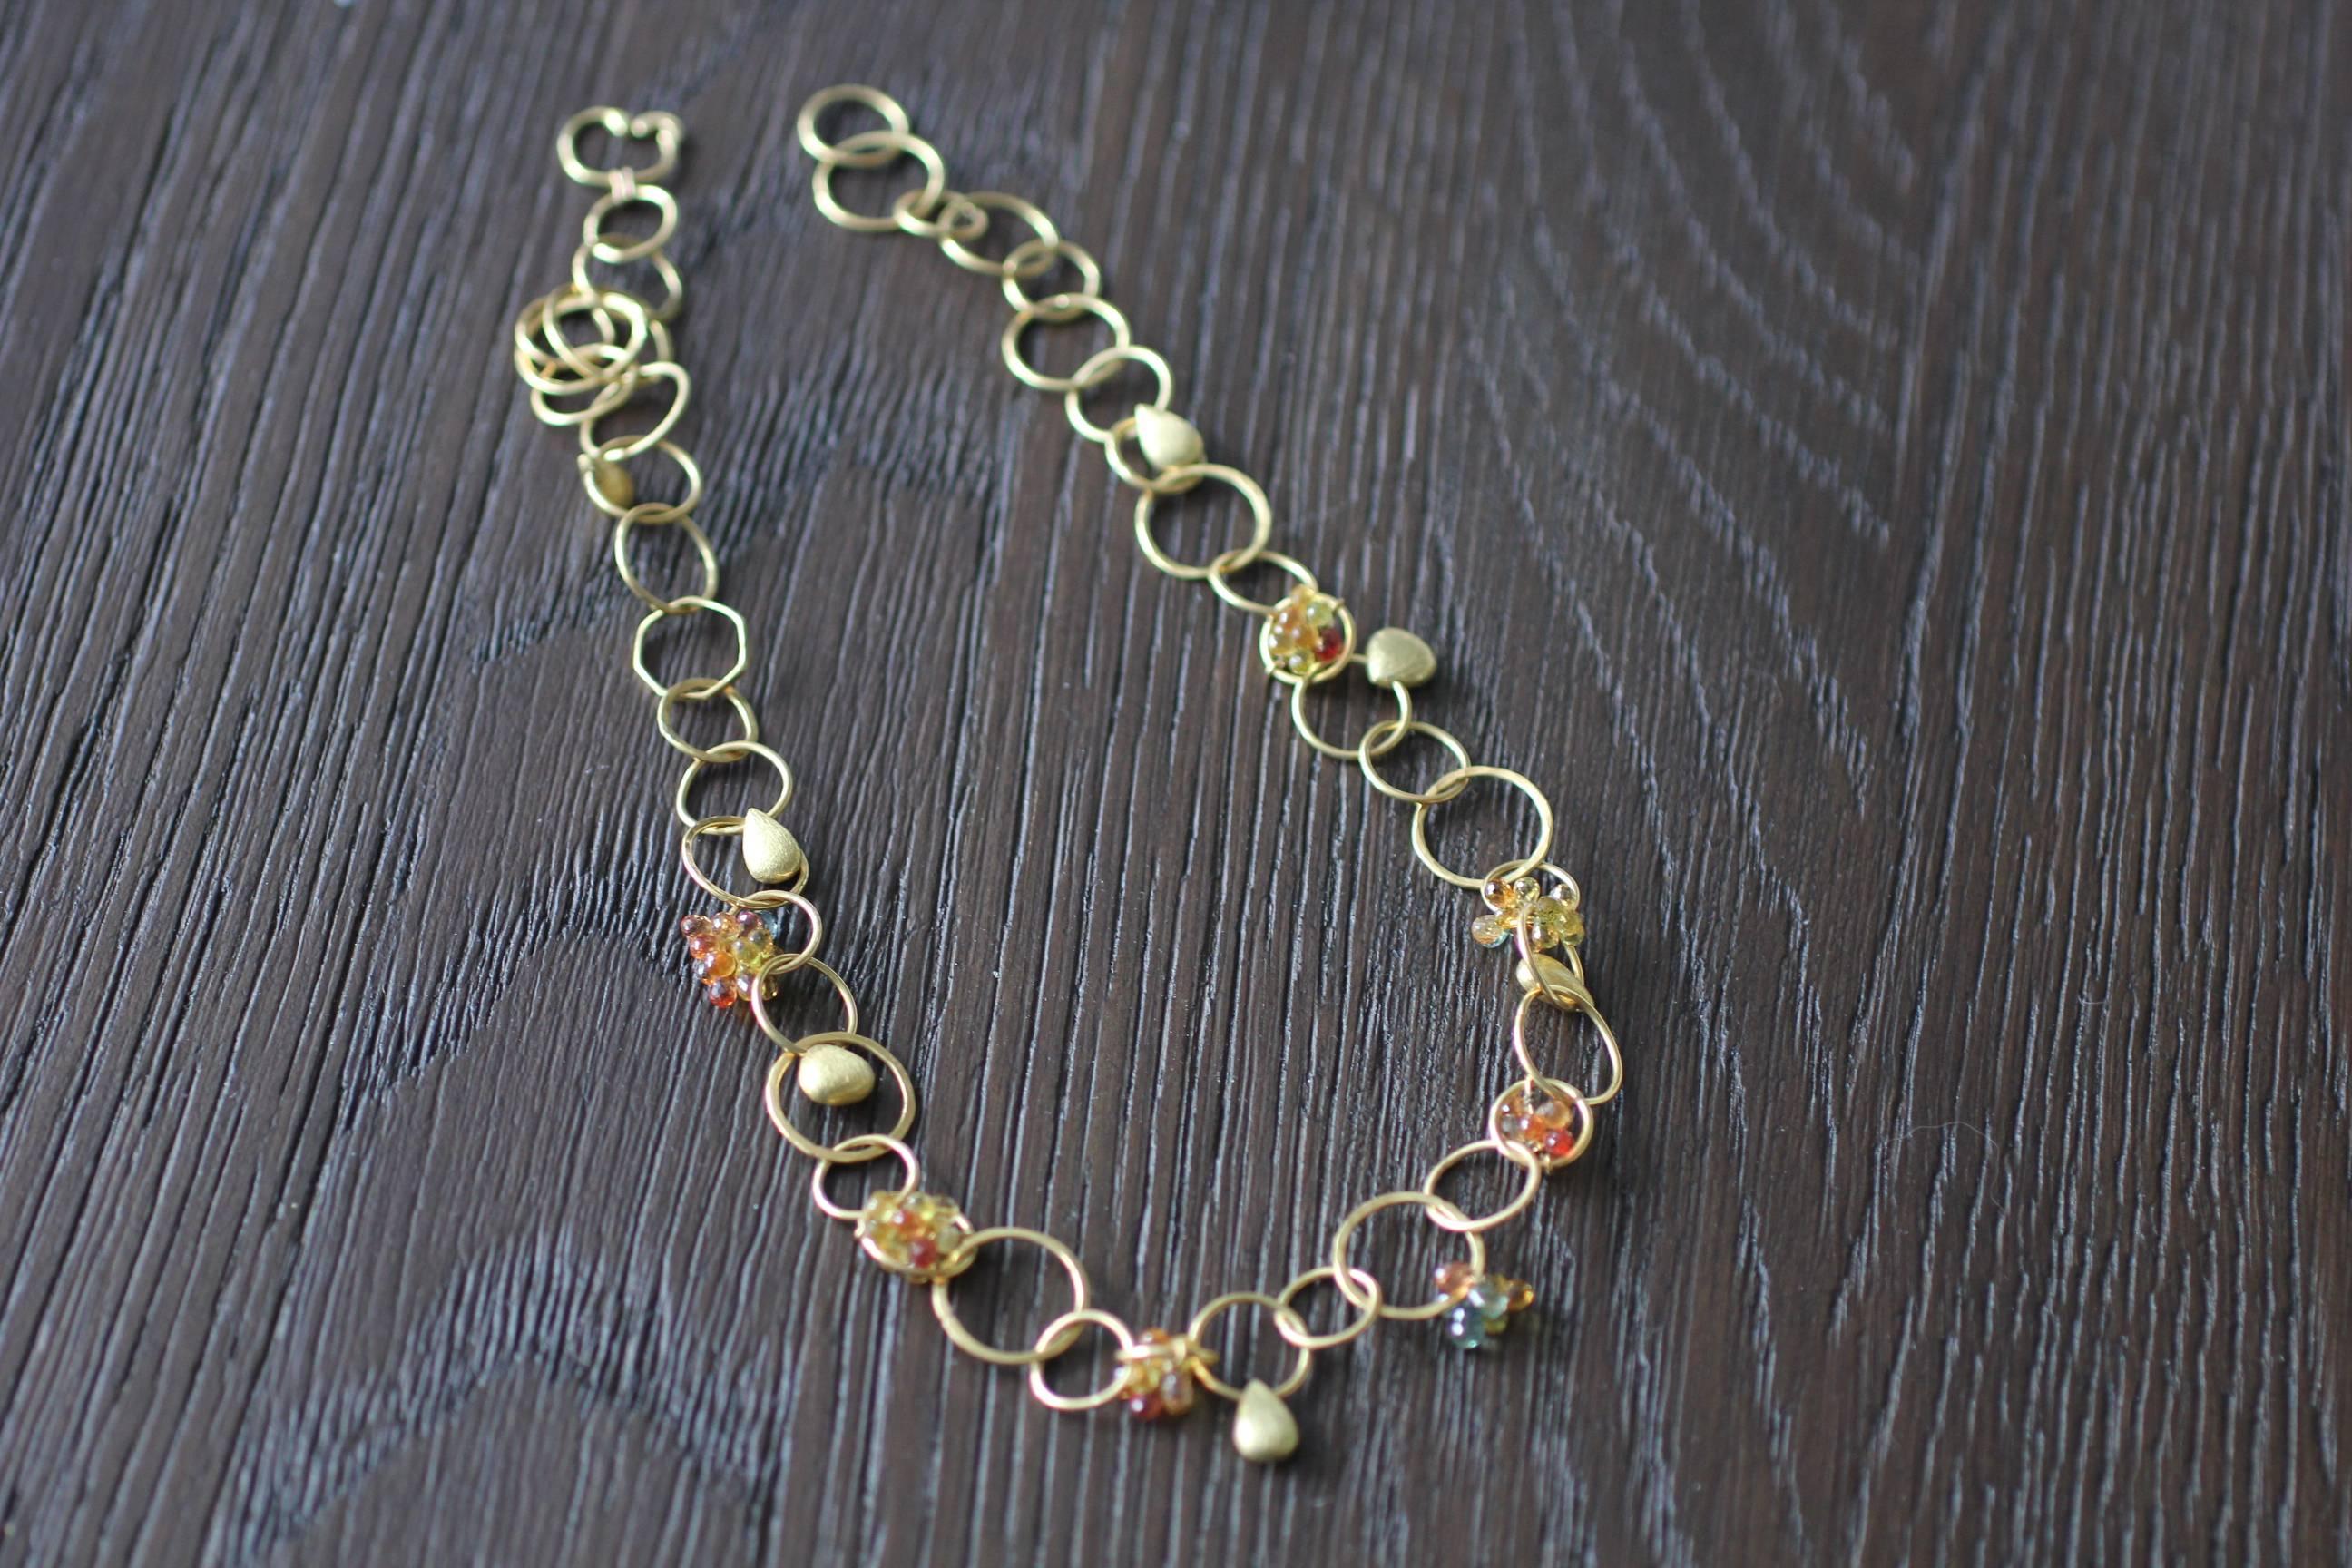 Circus Necklace is a fun link chain necklace design, light and colorful, perfect for Spring and Summer. It is made of environmentally friendly recycled 18 Karat gold. The necklace is made up of round links ranging in diameter from 10mm to 15mm, some